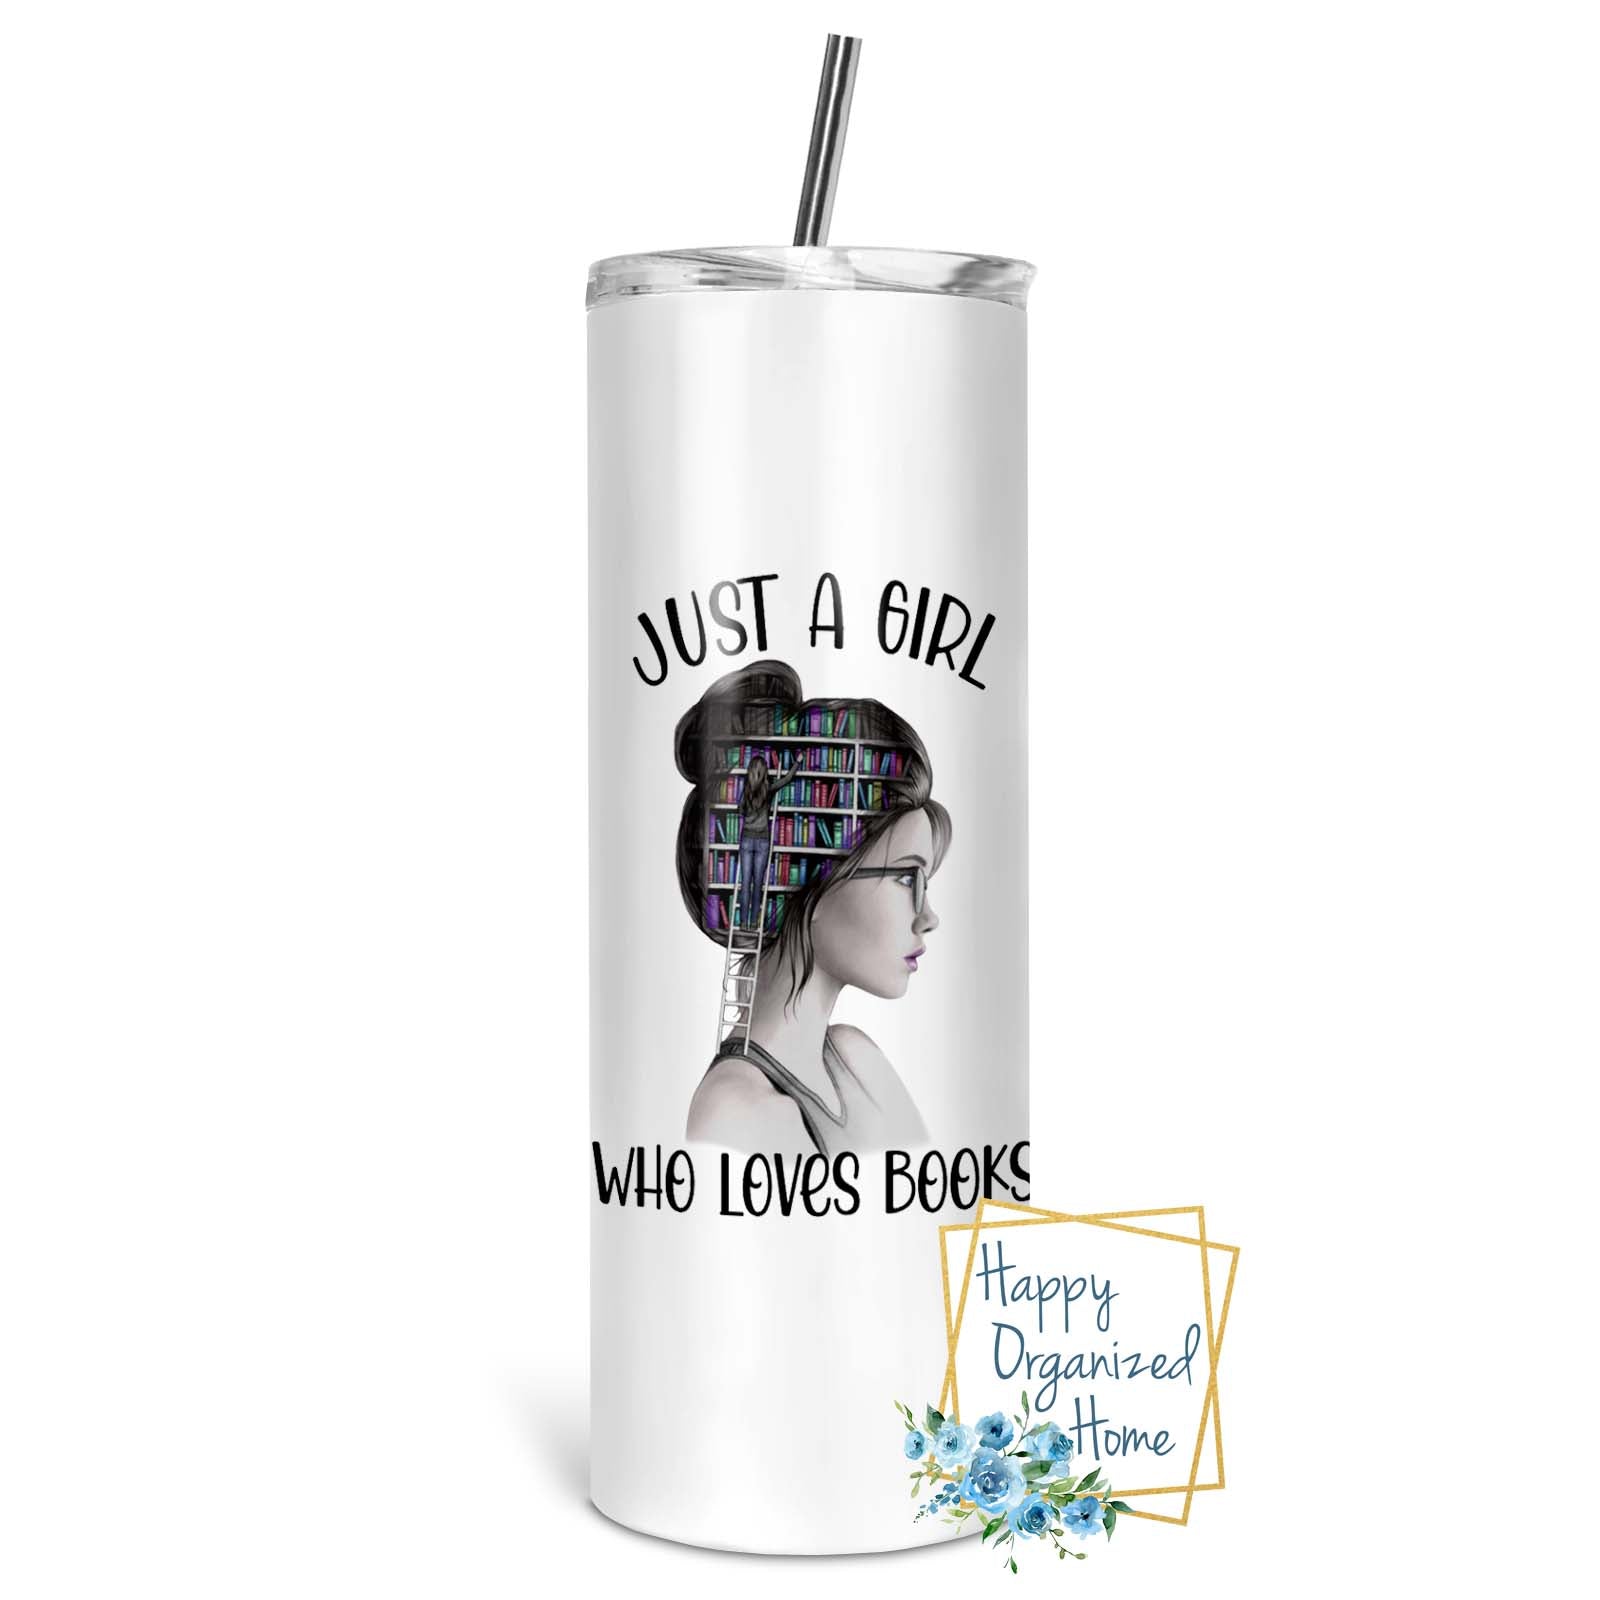 Just a girl who loves books - Insulated tumbler with metal straw